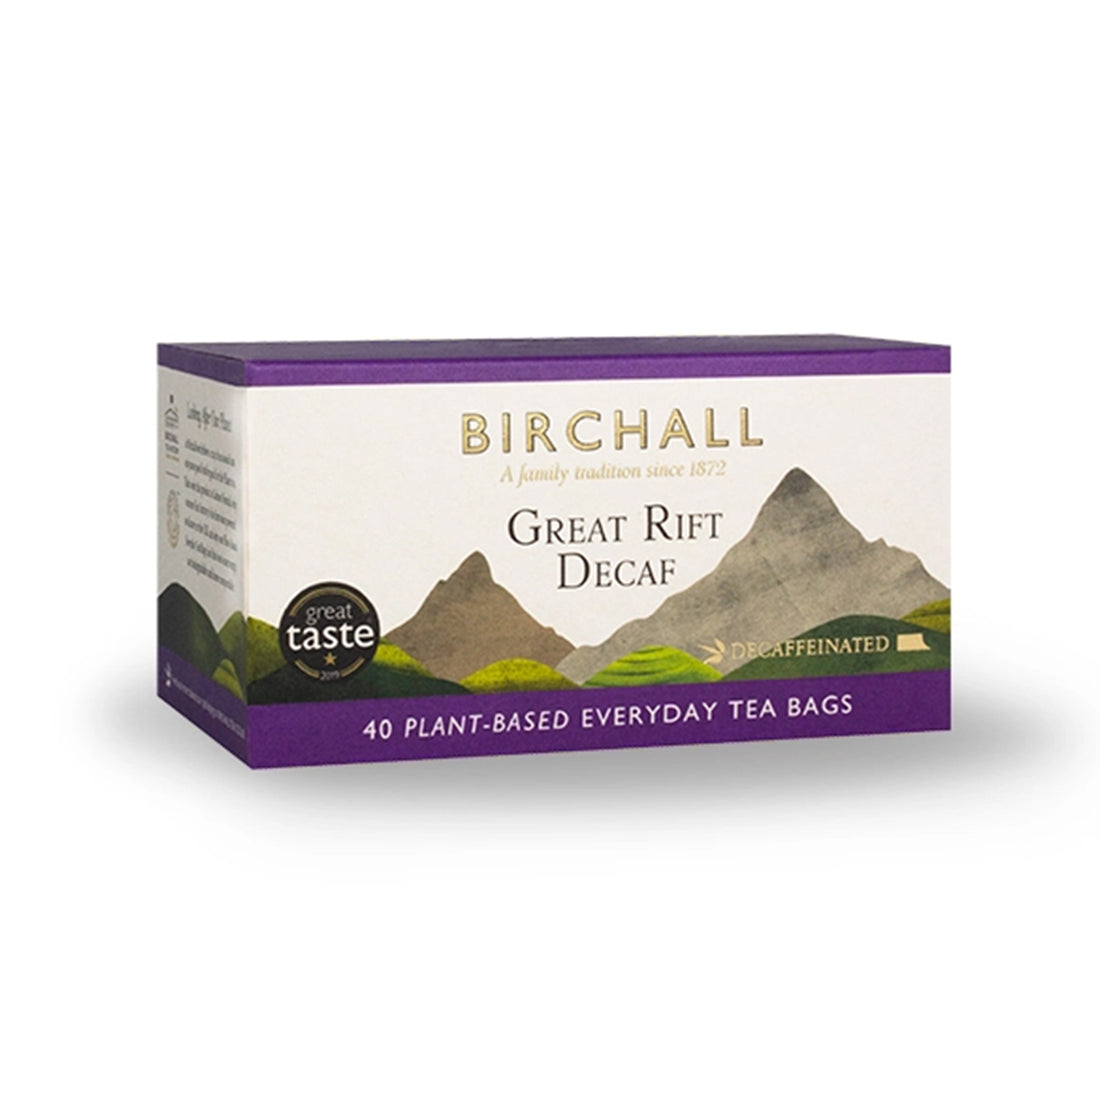 Birchall, Birchall Plant-Based Everyday Tea Bags 40pcs - Great Rift Decaf, Redber Coffee